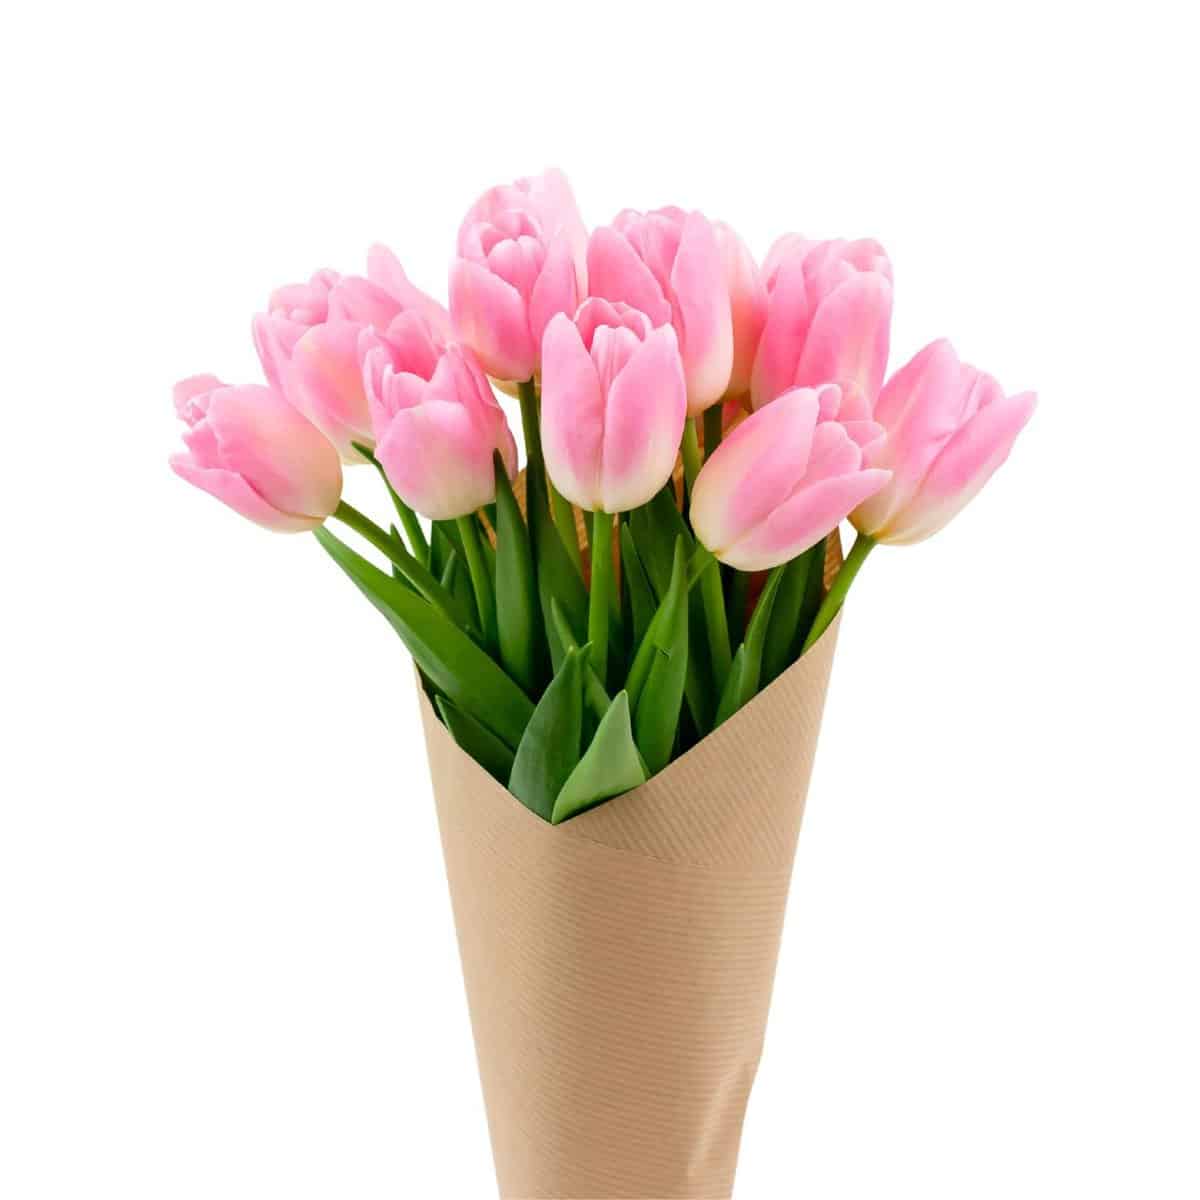 tulips in brown packaging for mothers day